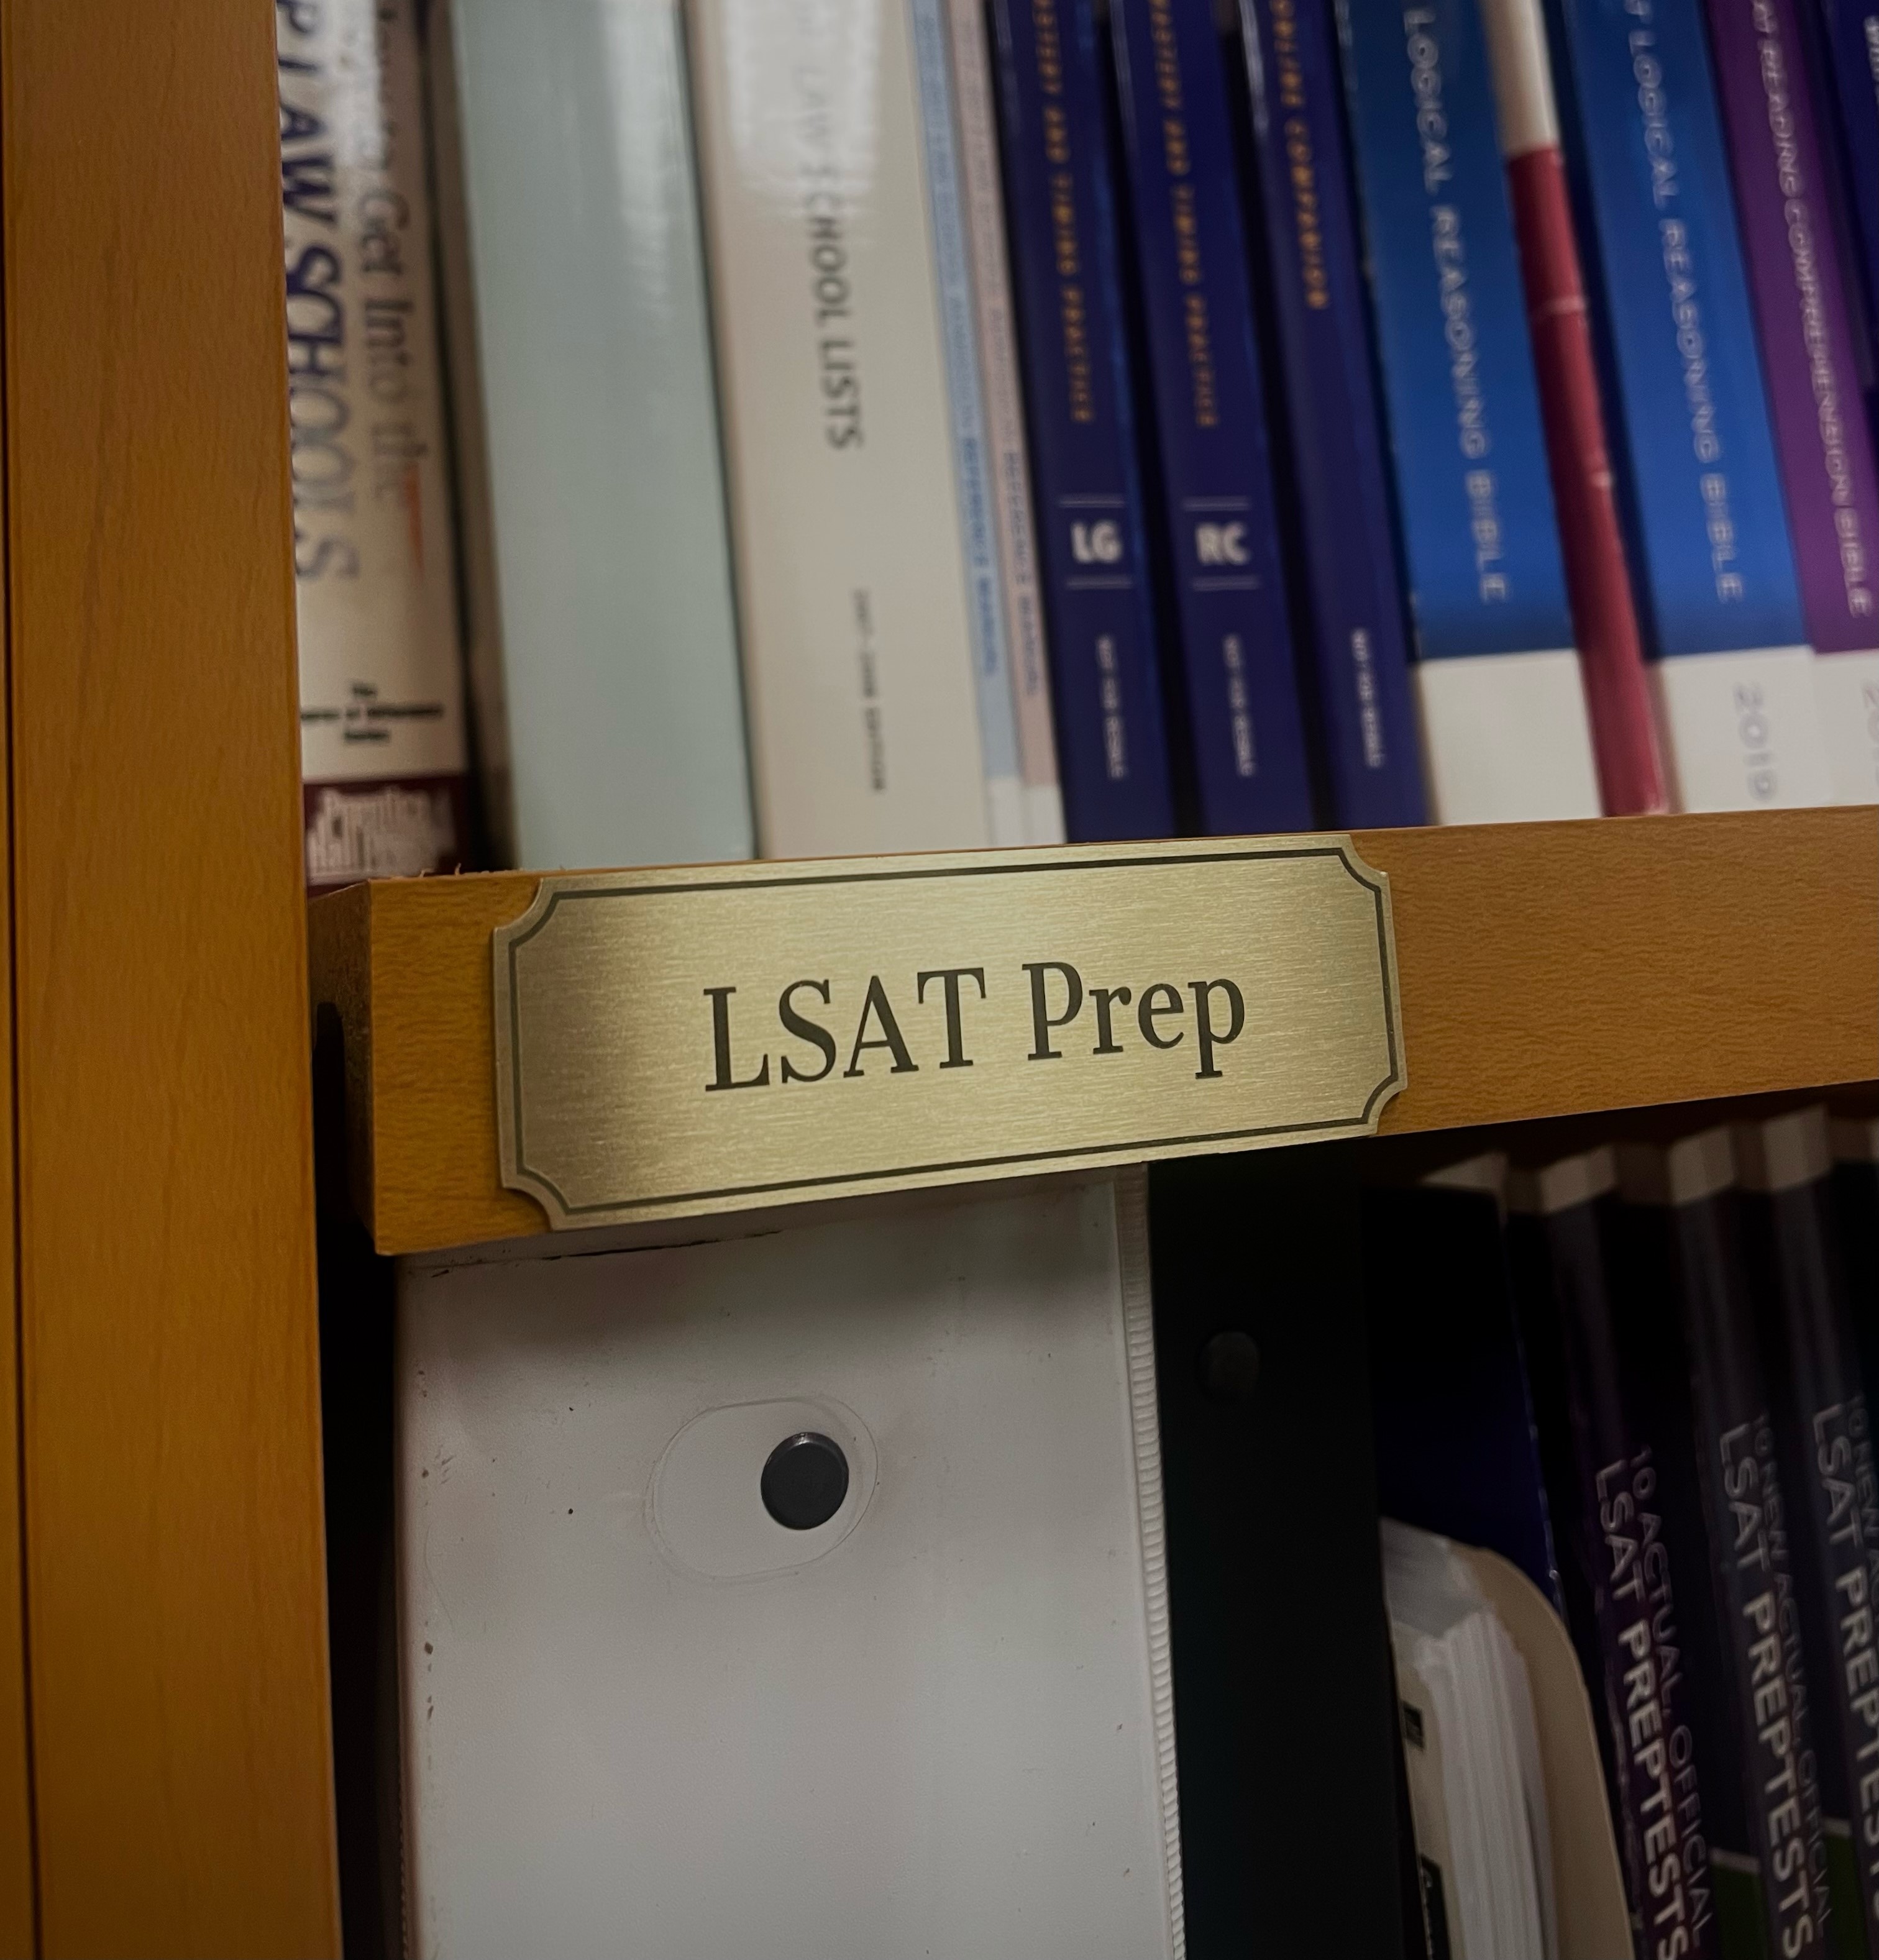 The Phelps & Womack Pre-Law Center has a law library for members that includes Books on Law, LSAT prep, Legal specialties, movies on law, and more.